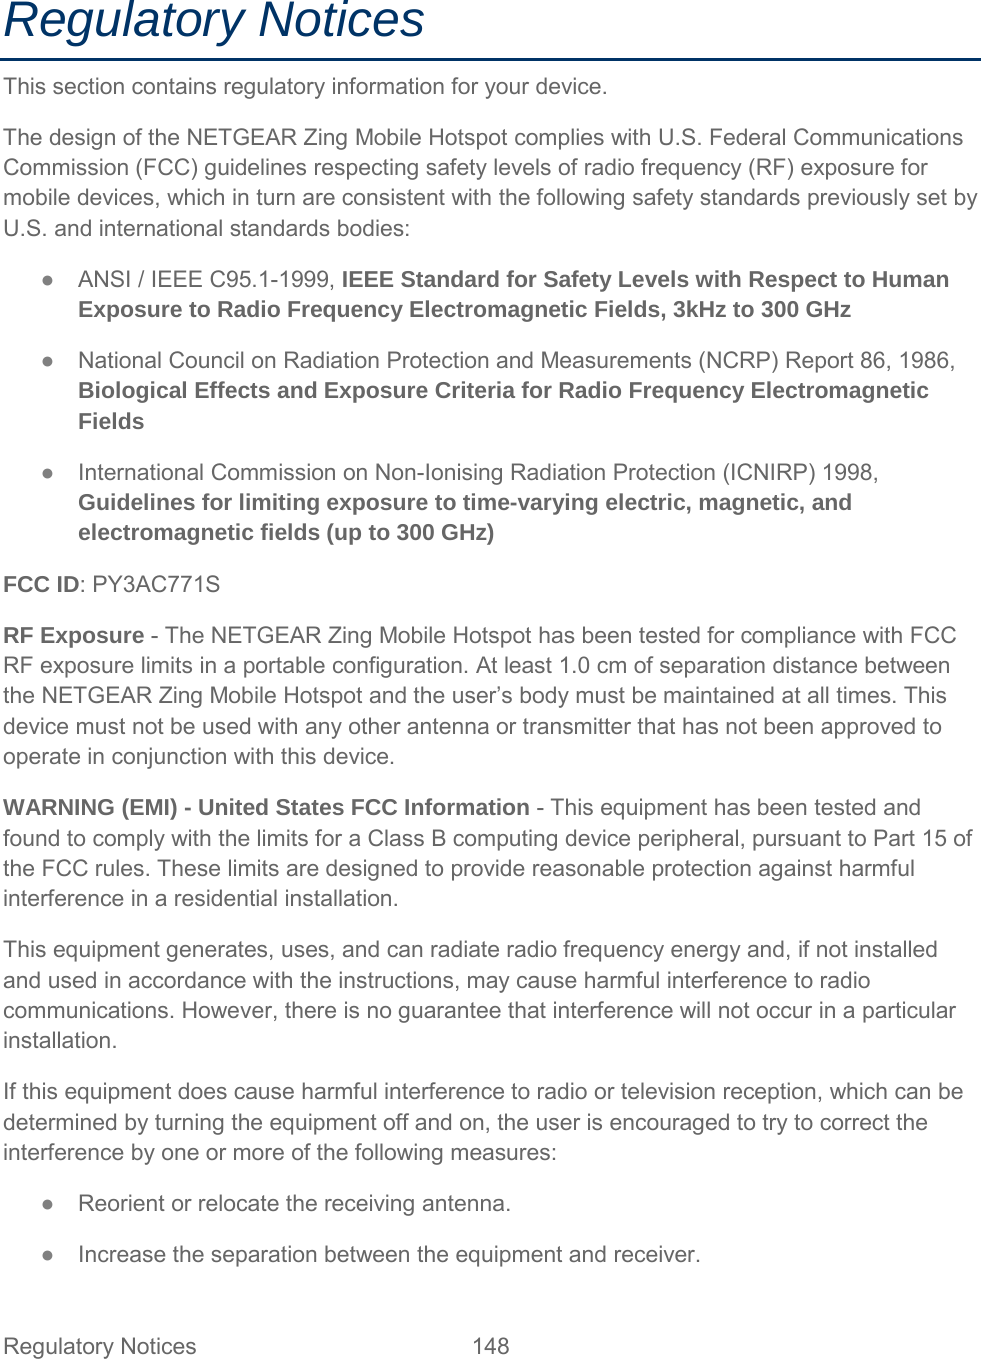 Regulatory Notices This section contains regulatory information for your device. The design of the NETGEAR Zing Mobile Hotspot complies with U.S. Federal Communications Commission (FCC) guidelines respecting safety levels of radio frequency (RF) exposure for mobile devices, which in turn are consistent with the following safety standards previously set by U.S. and international standards bodies: ●  ANSI / IEEE C95.1-1999, IEEE Standard for Safety Levels with Respect to Human Exposure to Radio Frequency Electromagnetic Fields, 3kHz to 300 GHz ●  National Council on Radiation Protection and Measurements (NCRP) Report 86, 1986, Biological Effects and Exposure Criteria for Radio Frequency Electromagnetic Fields ●  International Commission on Non-Ionising Radiation Protection (ICNIRP) 1998, Guidelines for limiting exposure to time-varying electric, magnetic, and electromagnetic fields (up to 300 GHz) FCC ID: PY3AC771S RF Exposure - The NETGEAR Zing Mobile Hotspot has been tested for compliance with FCC RF exposure limits in a portable configuration. At least 1.0 cm of separation distance between the NETGEAR Zing Mobile Hotspot and the user’s body must be maintained at all times. This device must not be used with any other antenna or transmitter that has not been approved to operate in conjunction with this device. WARNING (EMI) - United States FCC Information - This equipment has been tested and found to comply with the limits for a Class B computing device peripheral, pursuant to Part 15 of the FCC rules. These limits are designed to provide reasonable protection against harmful interference in a residential installation. This equipment generates, uses, and can radiate radio frequency energy and, if not installed and used in accordance with the instructions, may cause harmful interference to radio communications. However, there is no guarantee that interference will not occur in a particular installation. If this equipment does cause harmful interference to radio or television reception, which can be determined by turning the equipment off and on, the user is encouraged to try to correct the interference by one or more of the following measures: ●  Reorient or relocate the receiving antenna. ●  Increase the separation between the equipment and receiver. Regulatory Notices 148   